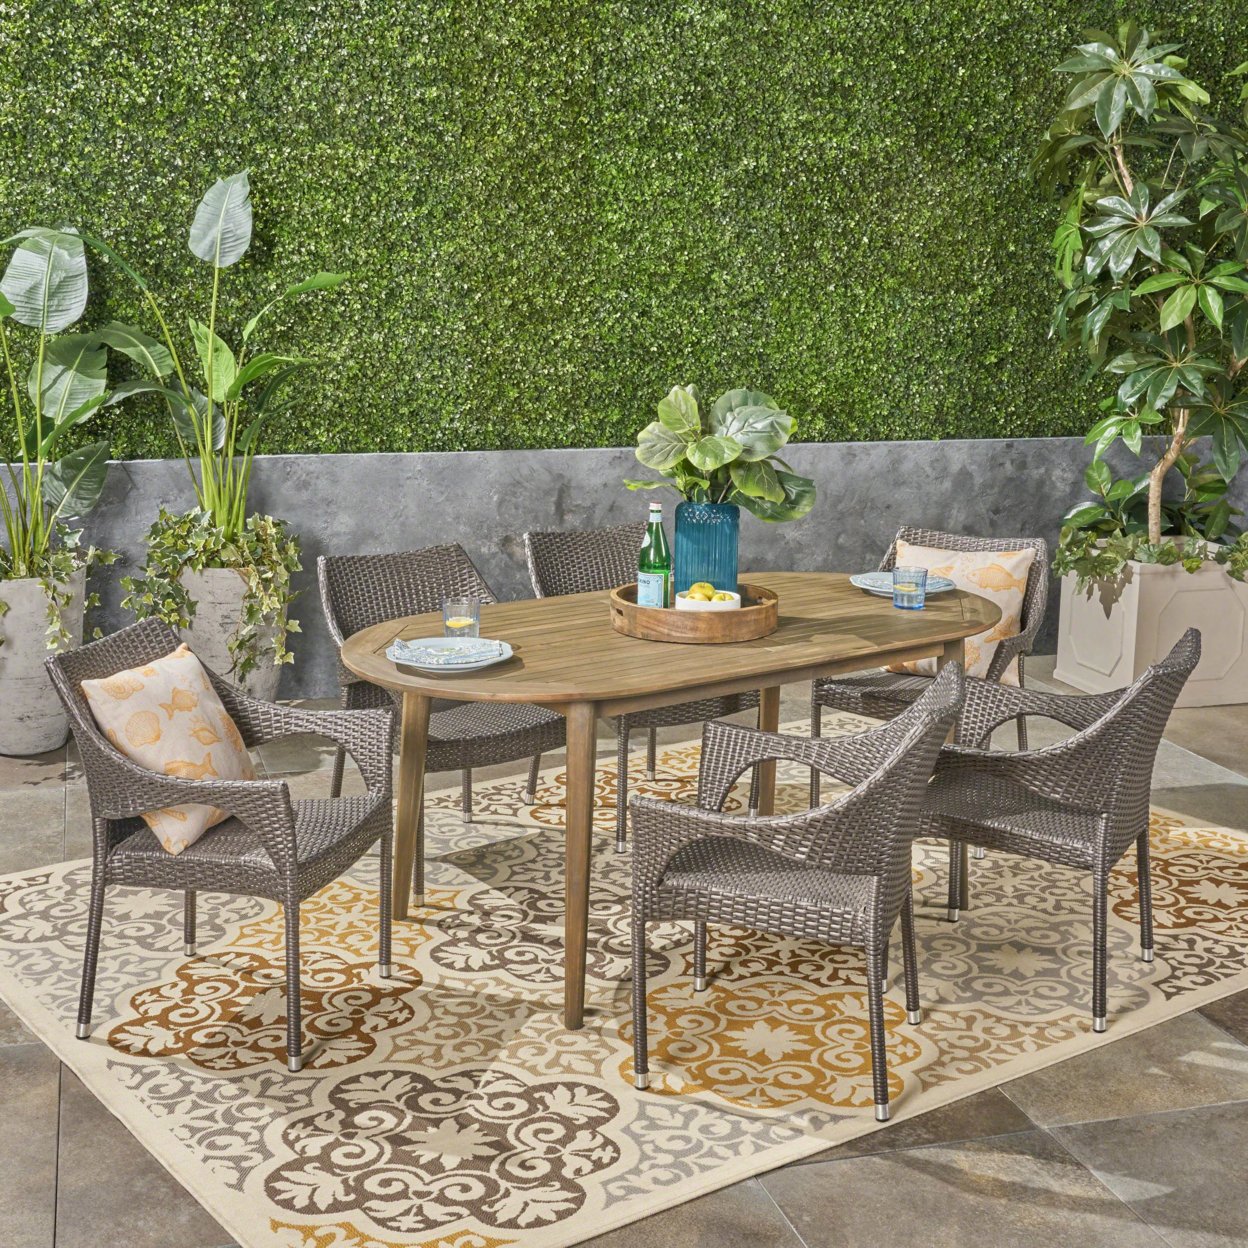 Fox Outdoor 7 Piece Acacia Wood Dining Set With Stacking Wicker Chairs - Teak Finish + Brown